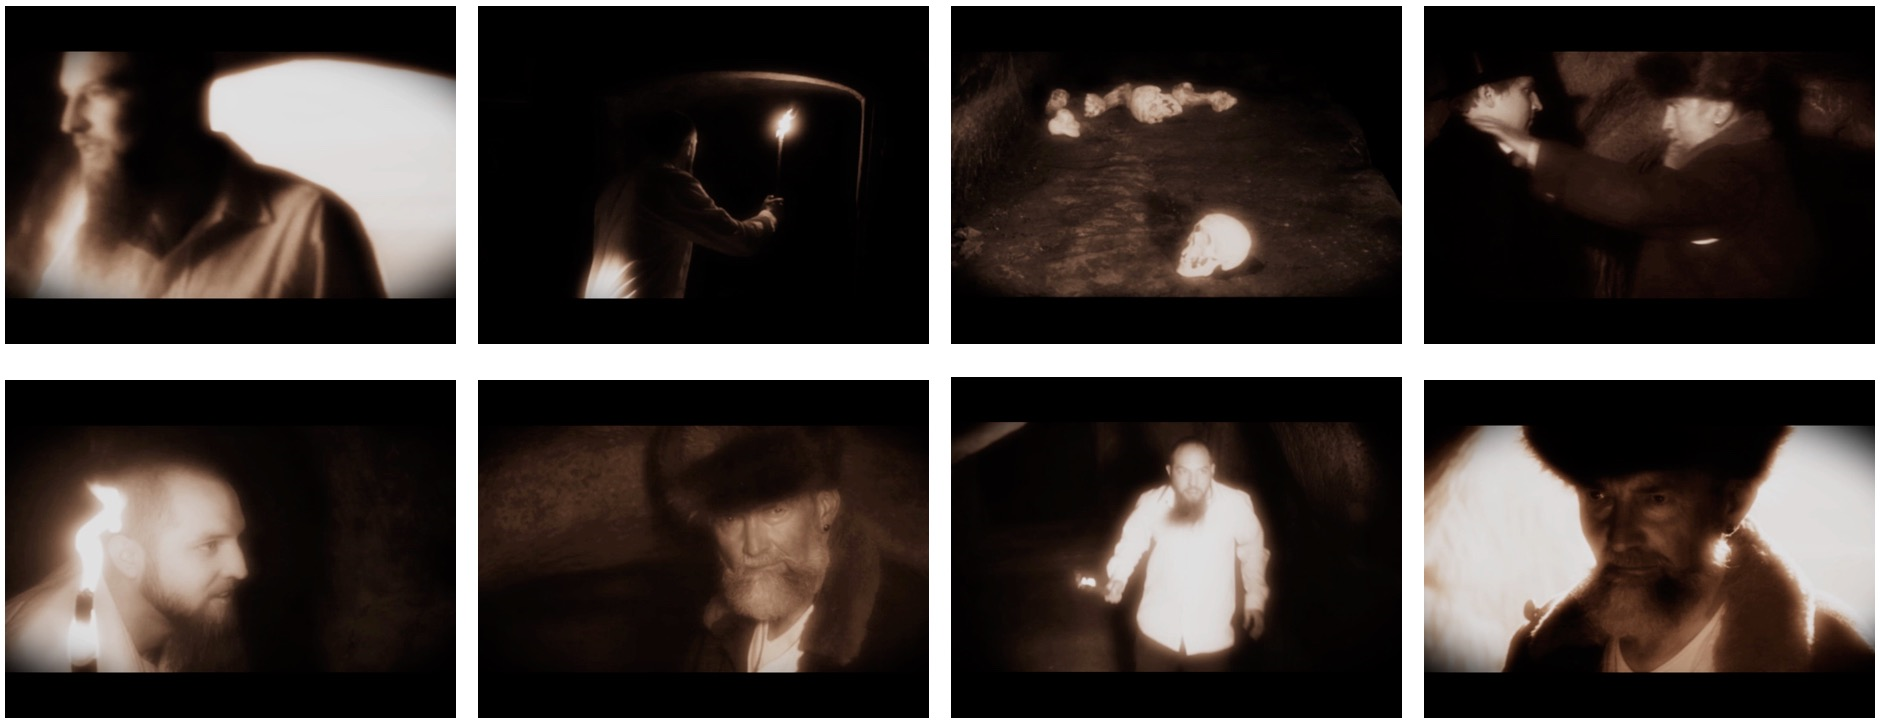 8 frames from the movie 'Catacombs.' More description above.